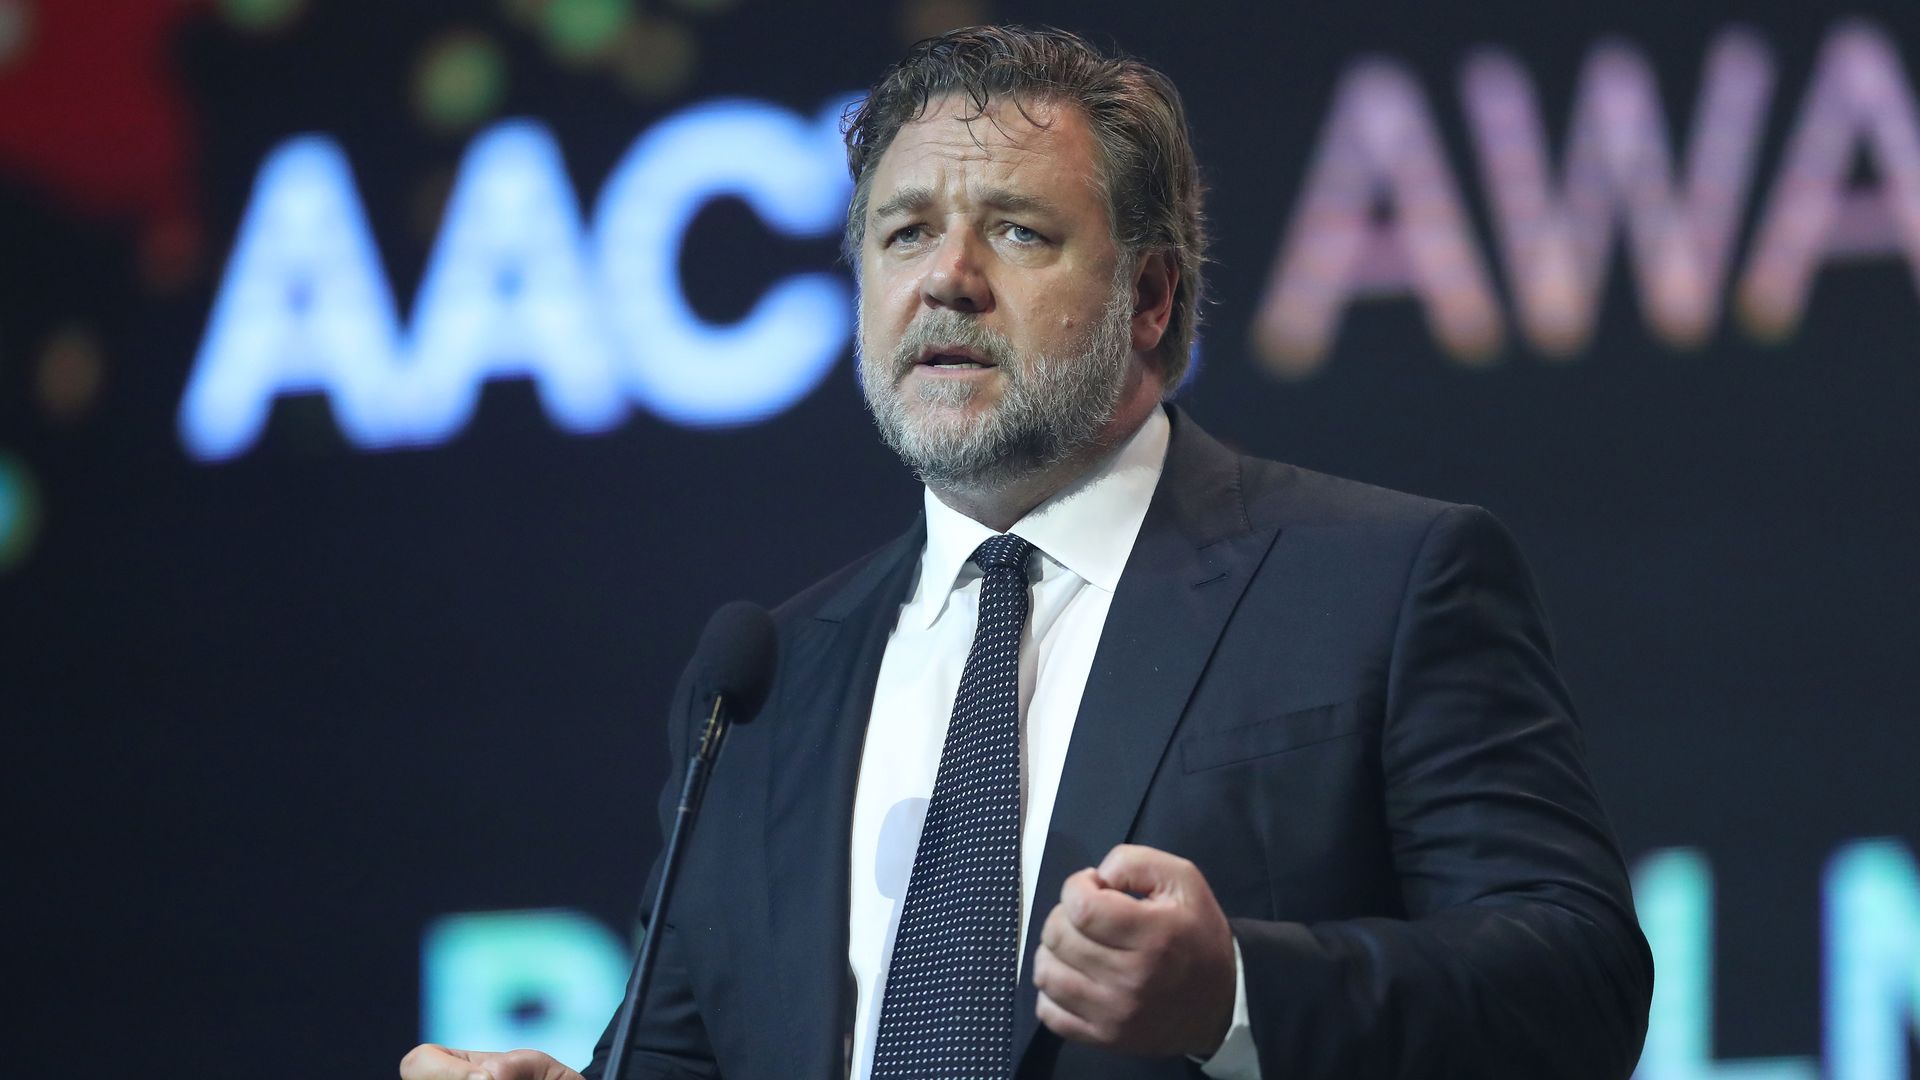 : Russell Crowe presents the AACTA Award for Best Asian Film Presented By PR Asia during the 7th AACTA Awards Presented by Foxtel | Ceremony at The Star on December 6, 2017 in Sydney